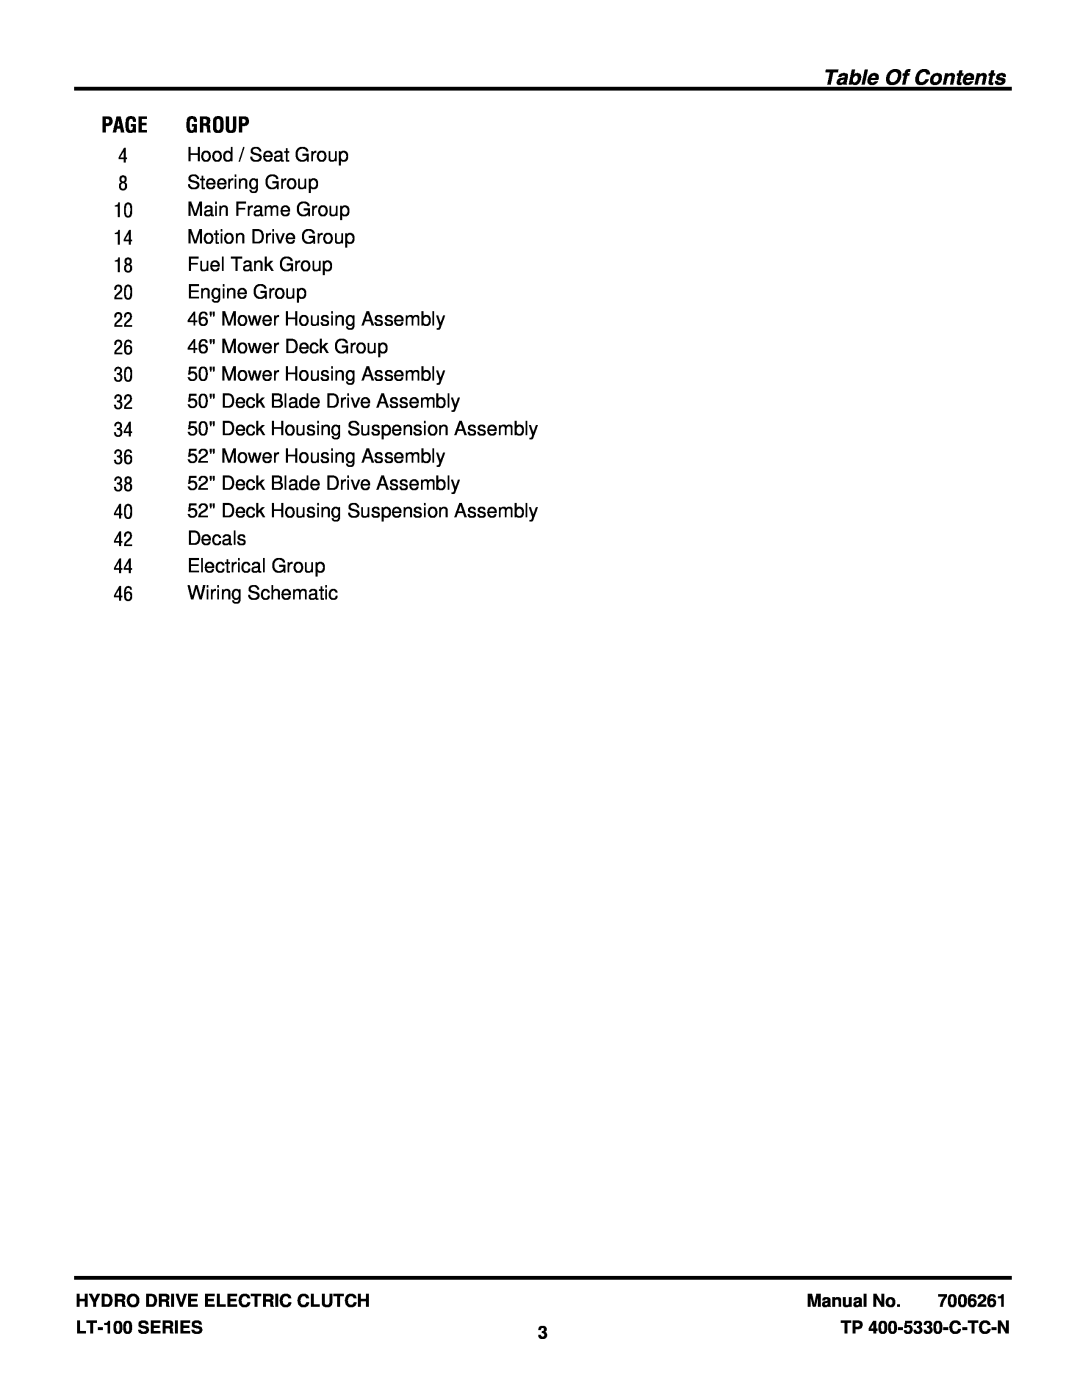 Snapper LT-100 Series manual Table Of Contents, Page Group 